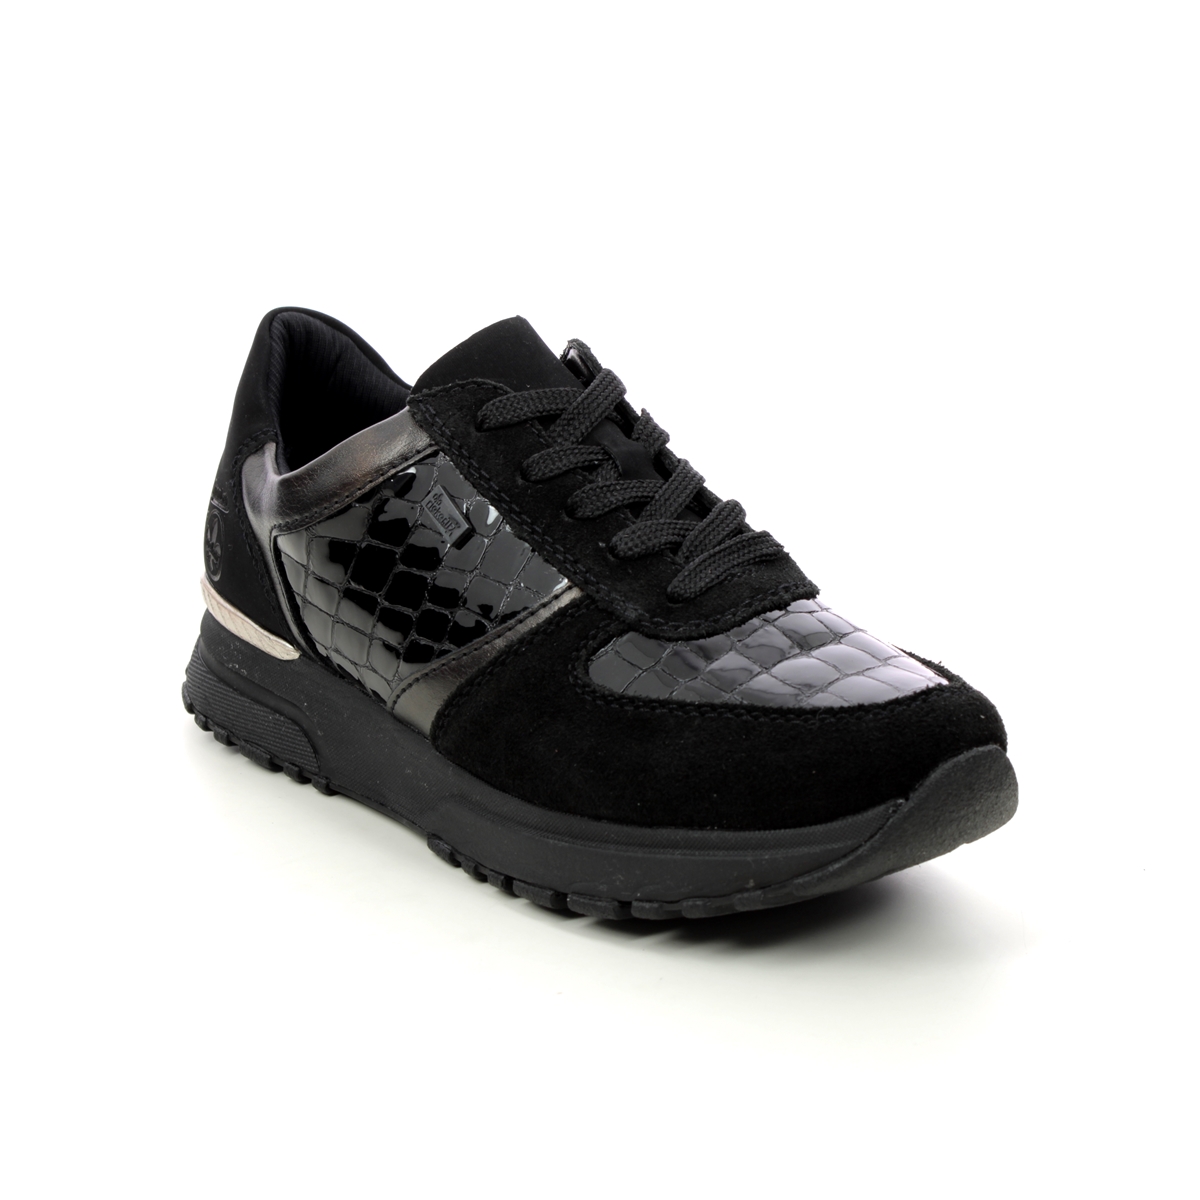 Rieker Govicroc Effect Black Patent Suede Womens Trainers N7412-00 In Size 39 In Plain Black Patent Suede